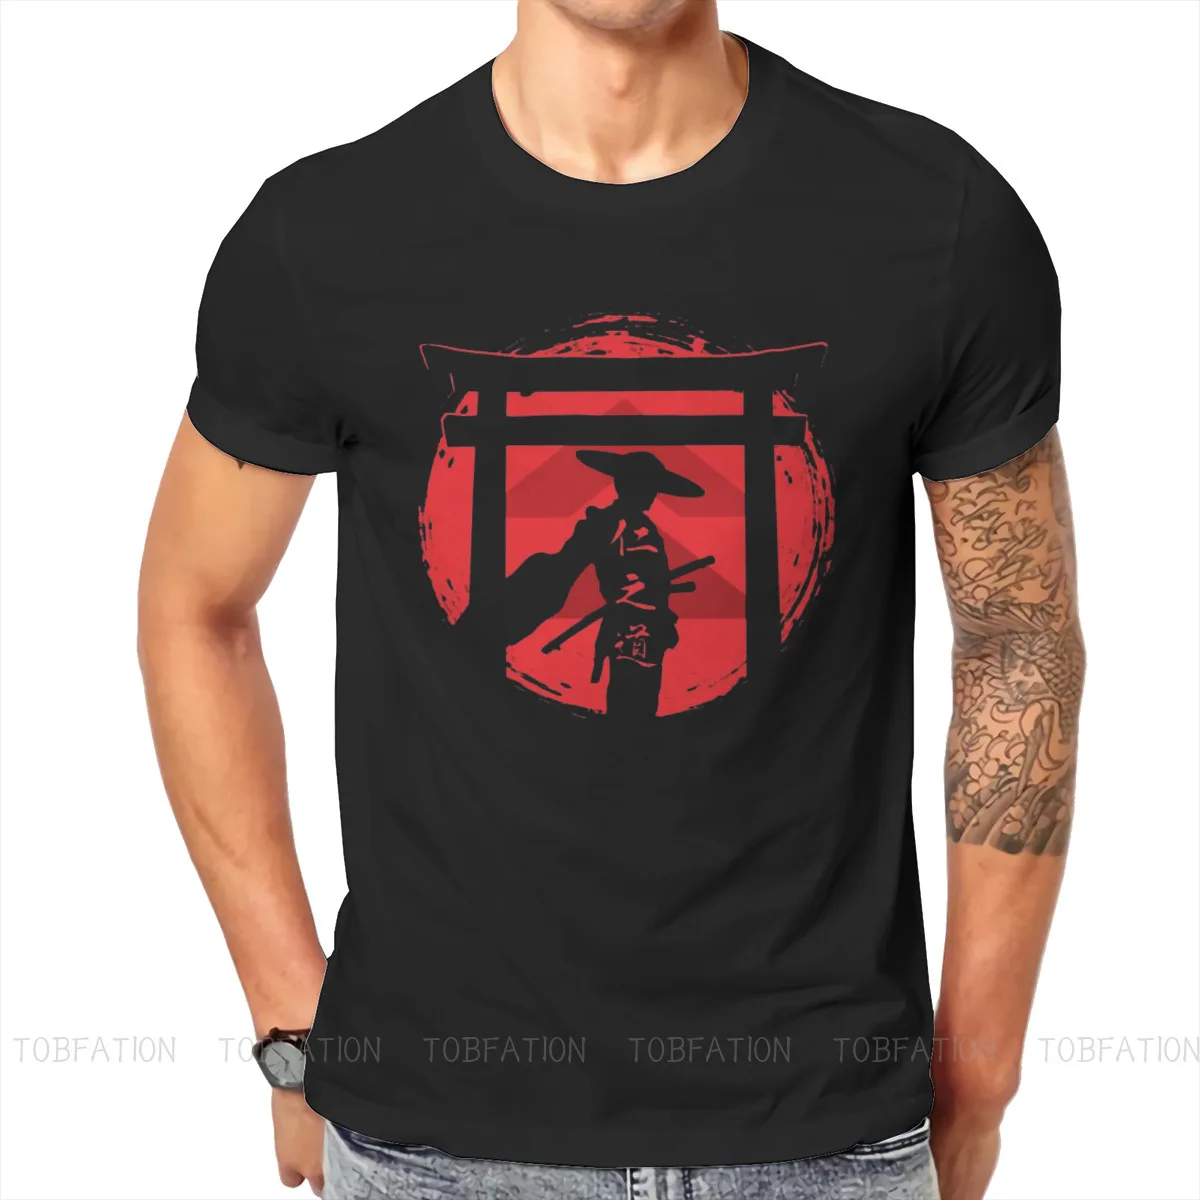 

Ghost of Tsushima Action Adventure Game Crewneck TShirts Samurai Print Homme T Shirt New Trend Clothing Size S-6XL